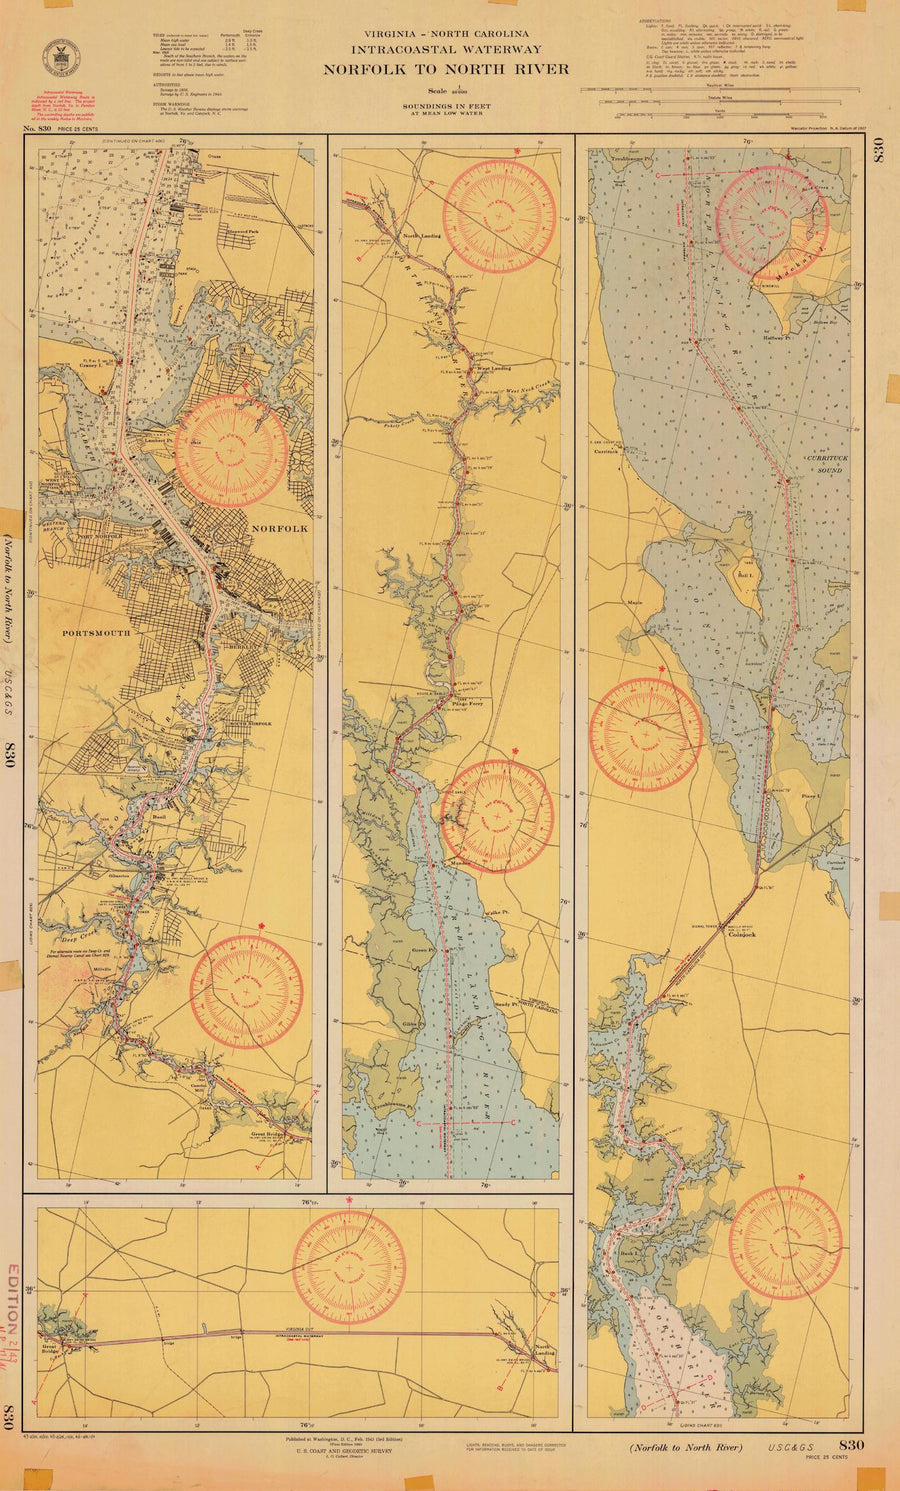 Intracoastal Waterway Map - Norfolk to North River - 1946